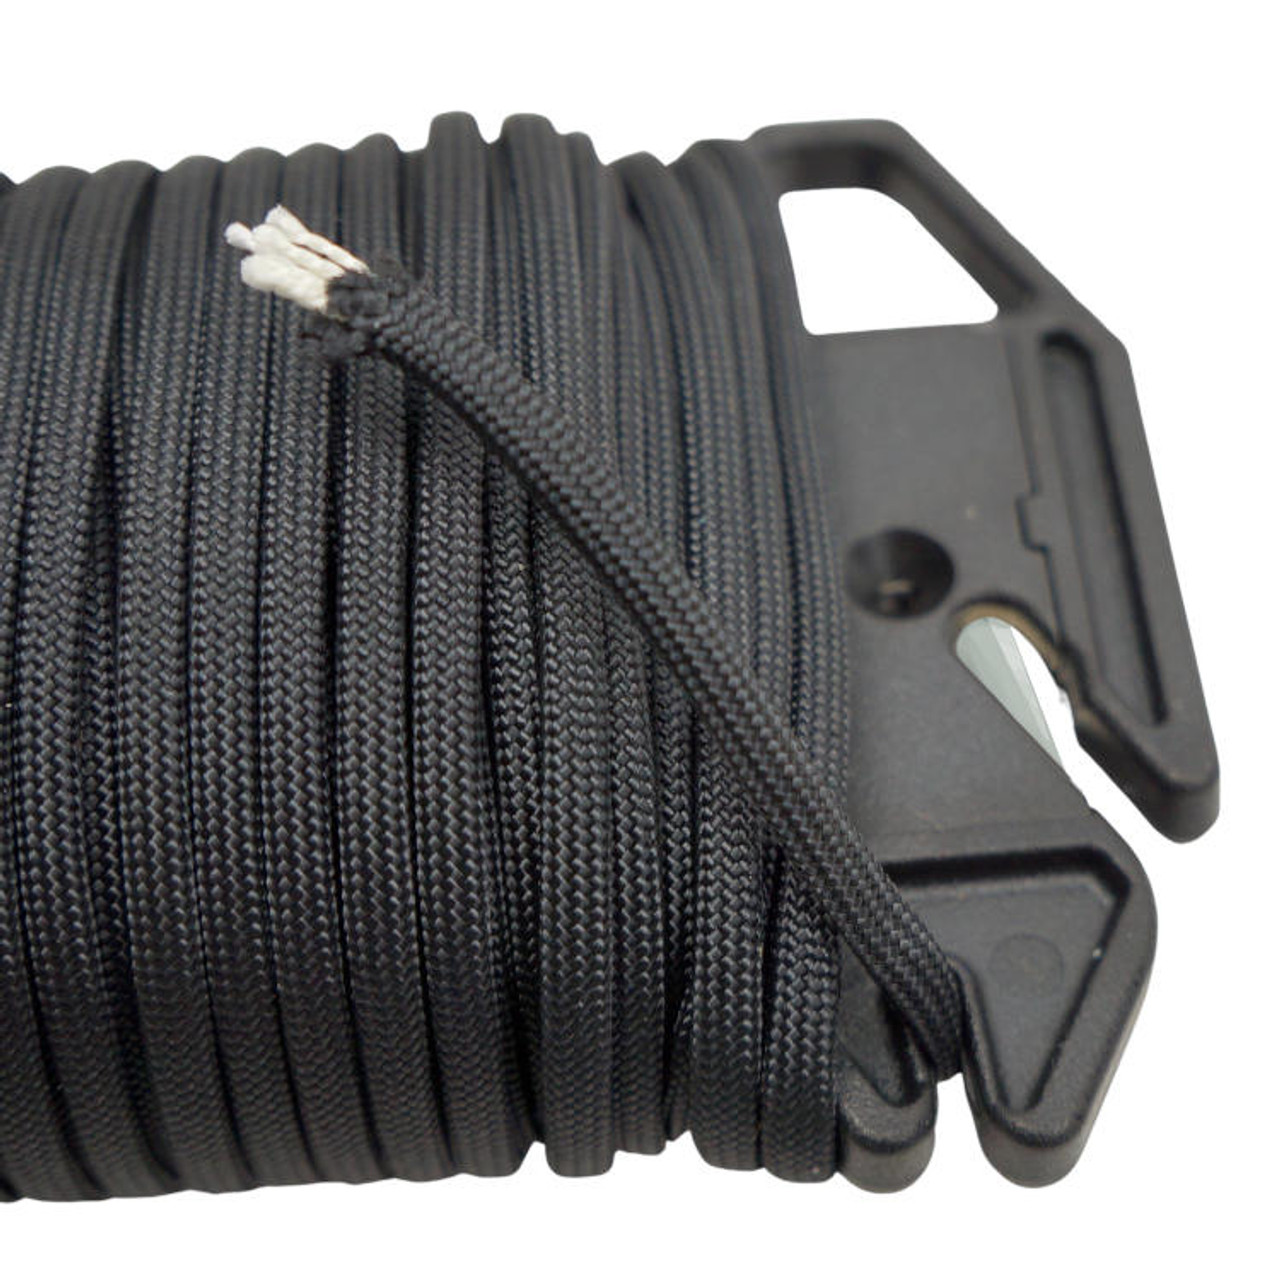 TANGLE-FREE CORD DISPENSER WITH 550-LB